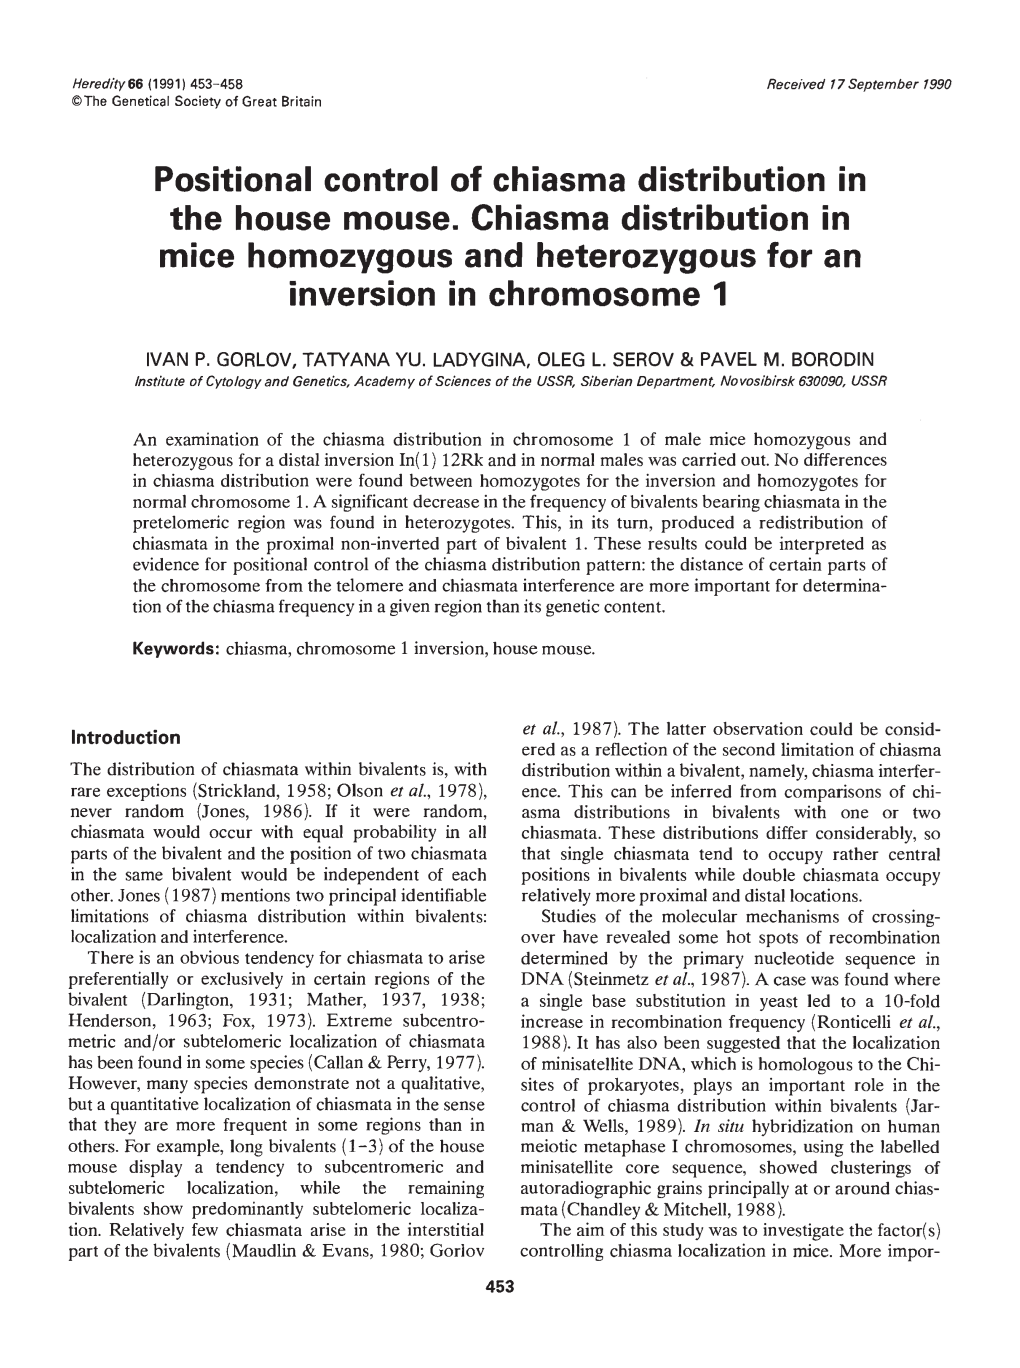 Positional Control of Chiasma Distribution in Inversion In